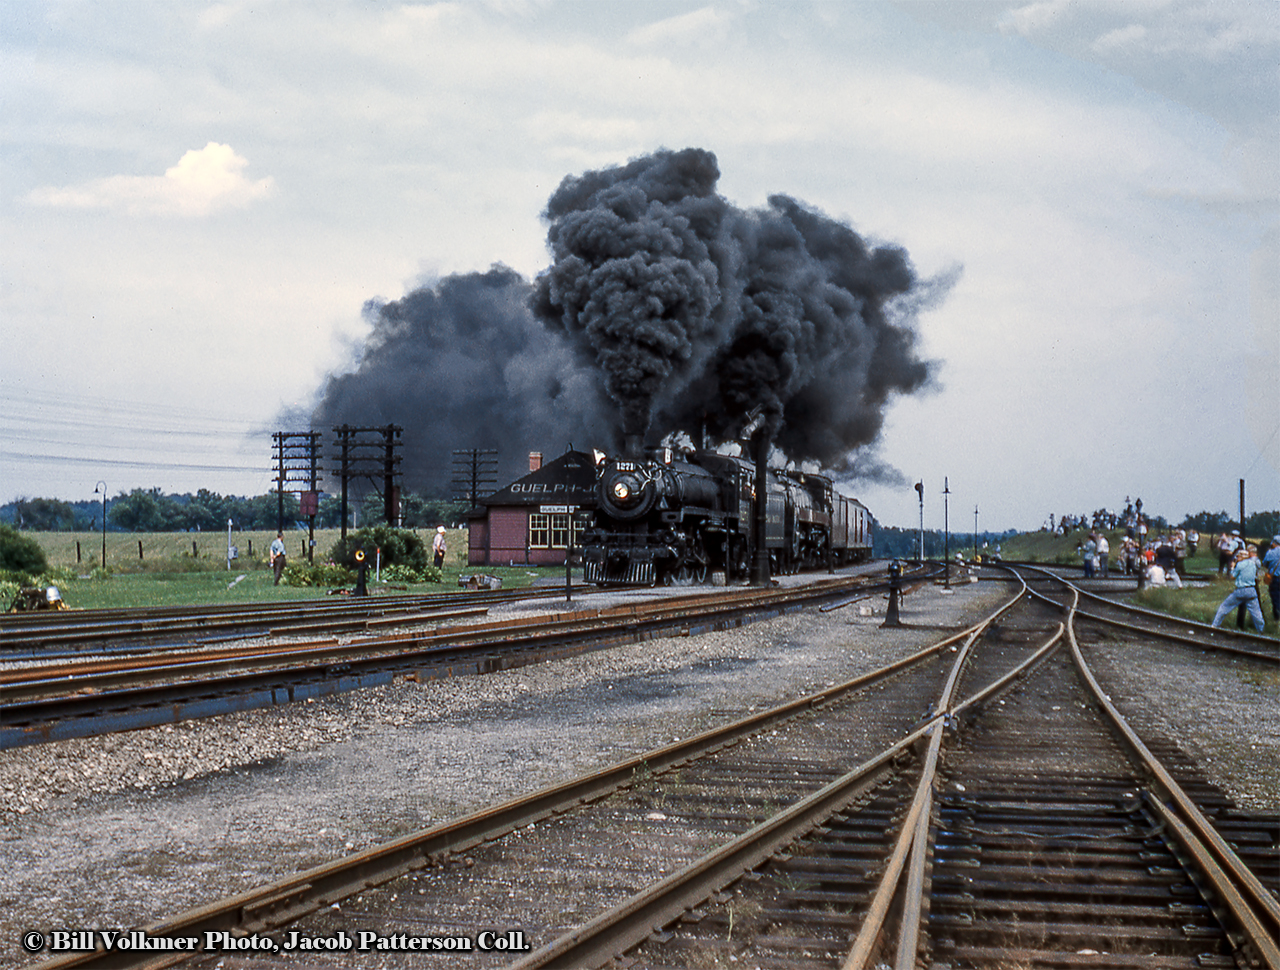 A double-headed excursion behind CPR G5c Pacific 1271 and H1c Royal Hudson 2839 storms past the station at Guelph Junction, cresting the grade beneath a billowing plume of smoke.  The annual NRHS Buffalo Convention was held in Toronto at the end of August 1958 featuring a two-day set of excursions, one over the CPR and one over the CNR the following day. The CPR excursion ran Toronto - Guelph Junction - Hamilton and return via Oakville. The other excursion can be seen at CNR Guelph Junction by clicking here.By this time only four steam locomotives (including the two pictured) were still active out of John Street, 1271 (last G5c Pacific, built by CLC April 1947), Royal Hudson 2839 (H1c, MLW 1937), 1265 (G5c, CLC 1947), and 2399 (G3g, CLC 1942), all but one of one of which would be retired and scrapped. The survivor, CPR 2839, is now on display at Sylmar California as part of the Nethercutt Collection. Thanks to Ray Kennedy and George Roth for information.Standing off to the right, Edward P. Haines snapped this shot, while another photographer captured the movement crossing over to the Oakville Subdivision at Hamilton Junction.Bill Volkmer Photo, Jacob Patterson Collection slide.